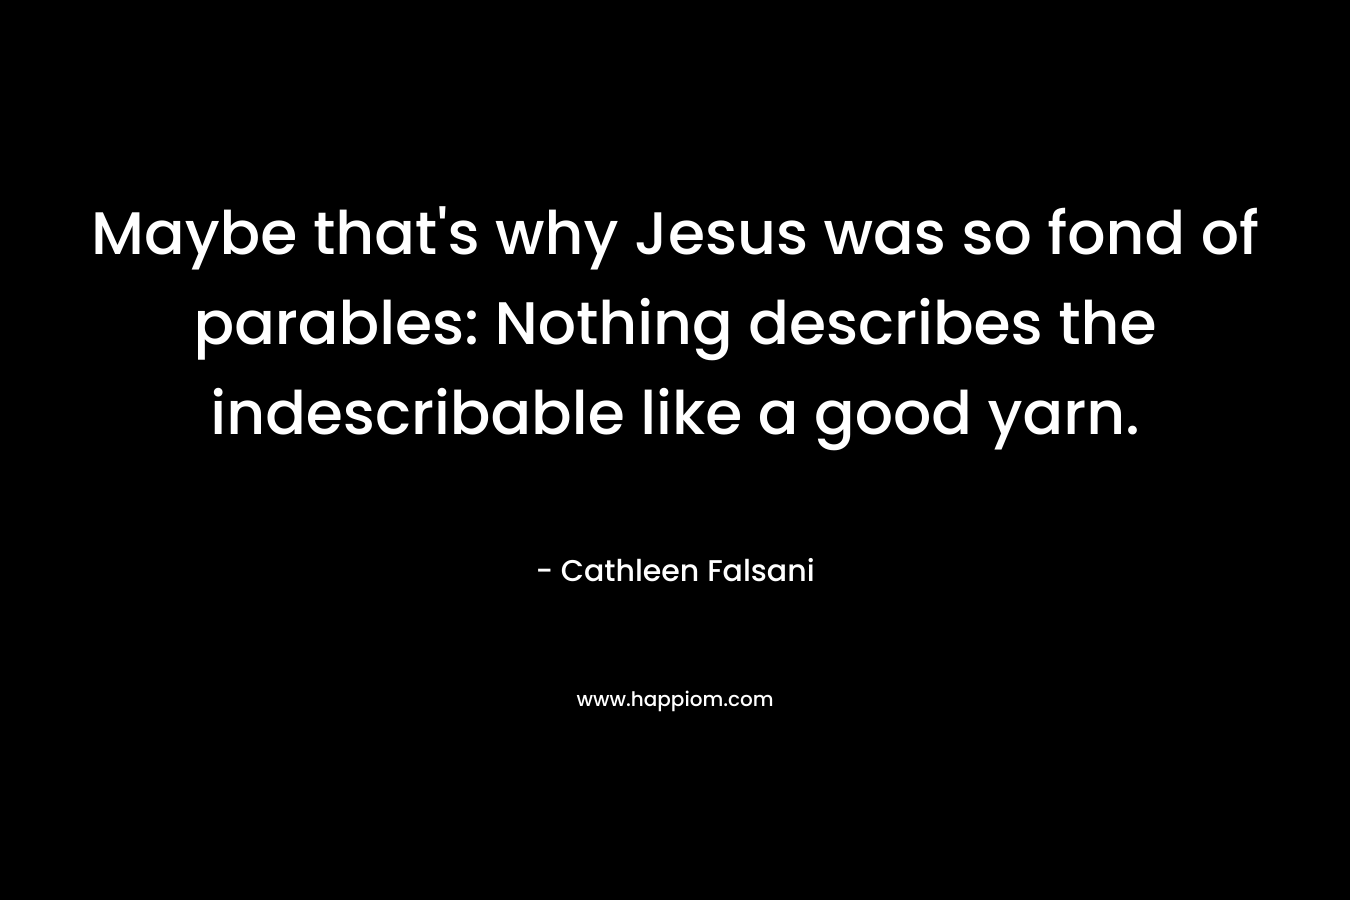 Maybe that's why Jesus was so fond of parables: Nothing describes the indescribable like a good yarn.